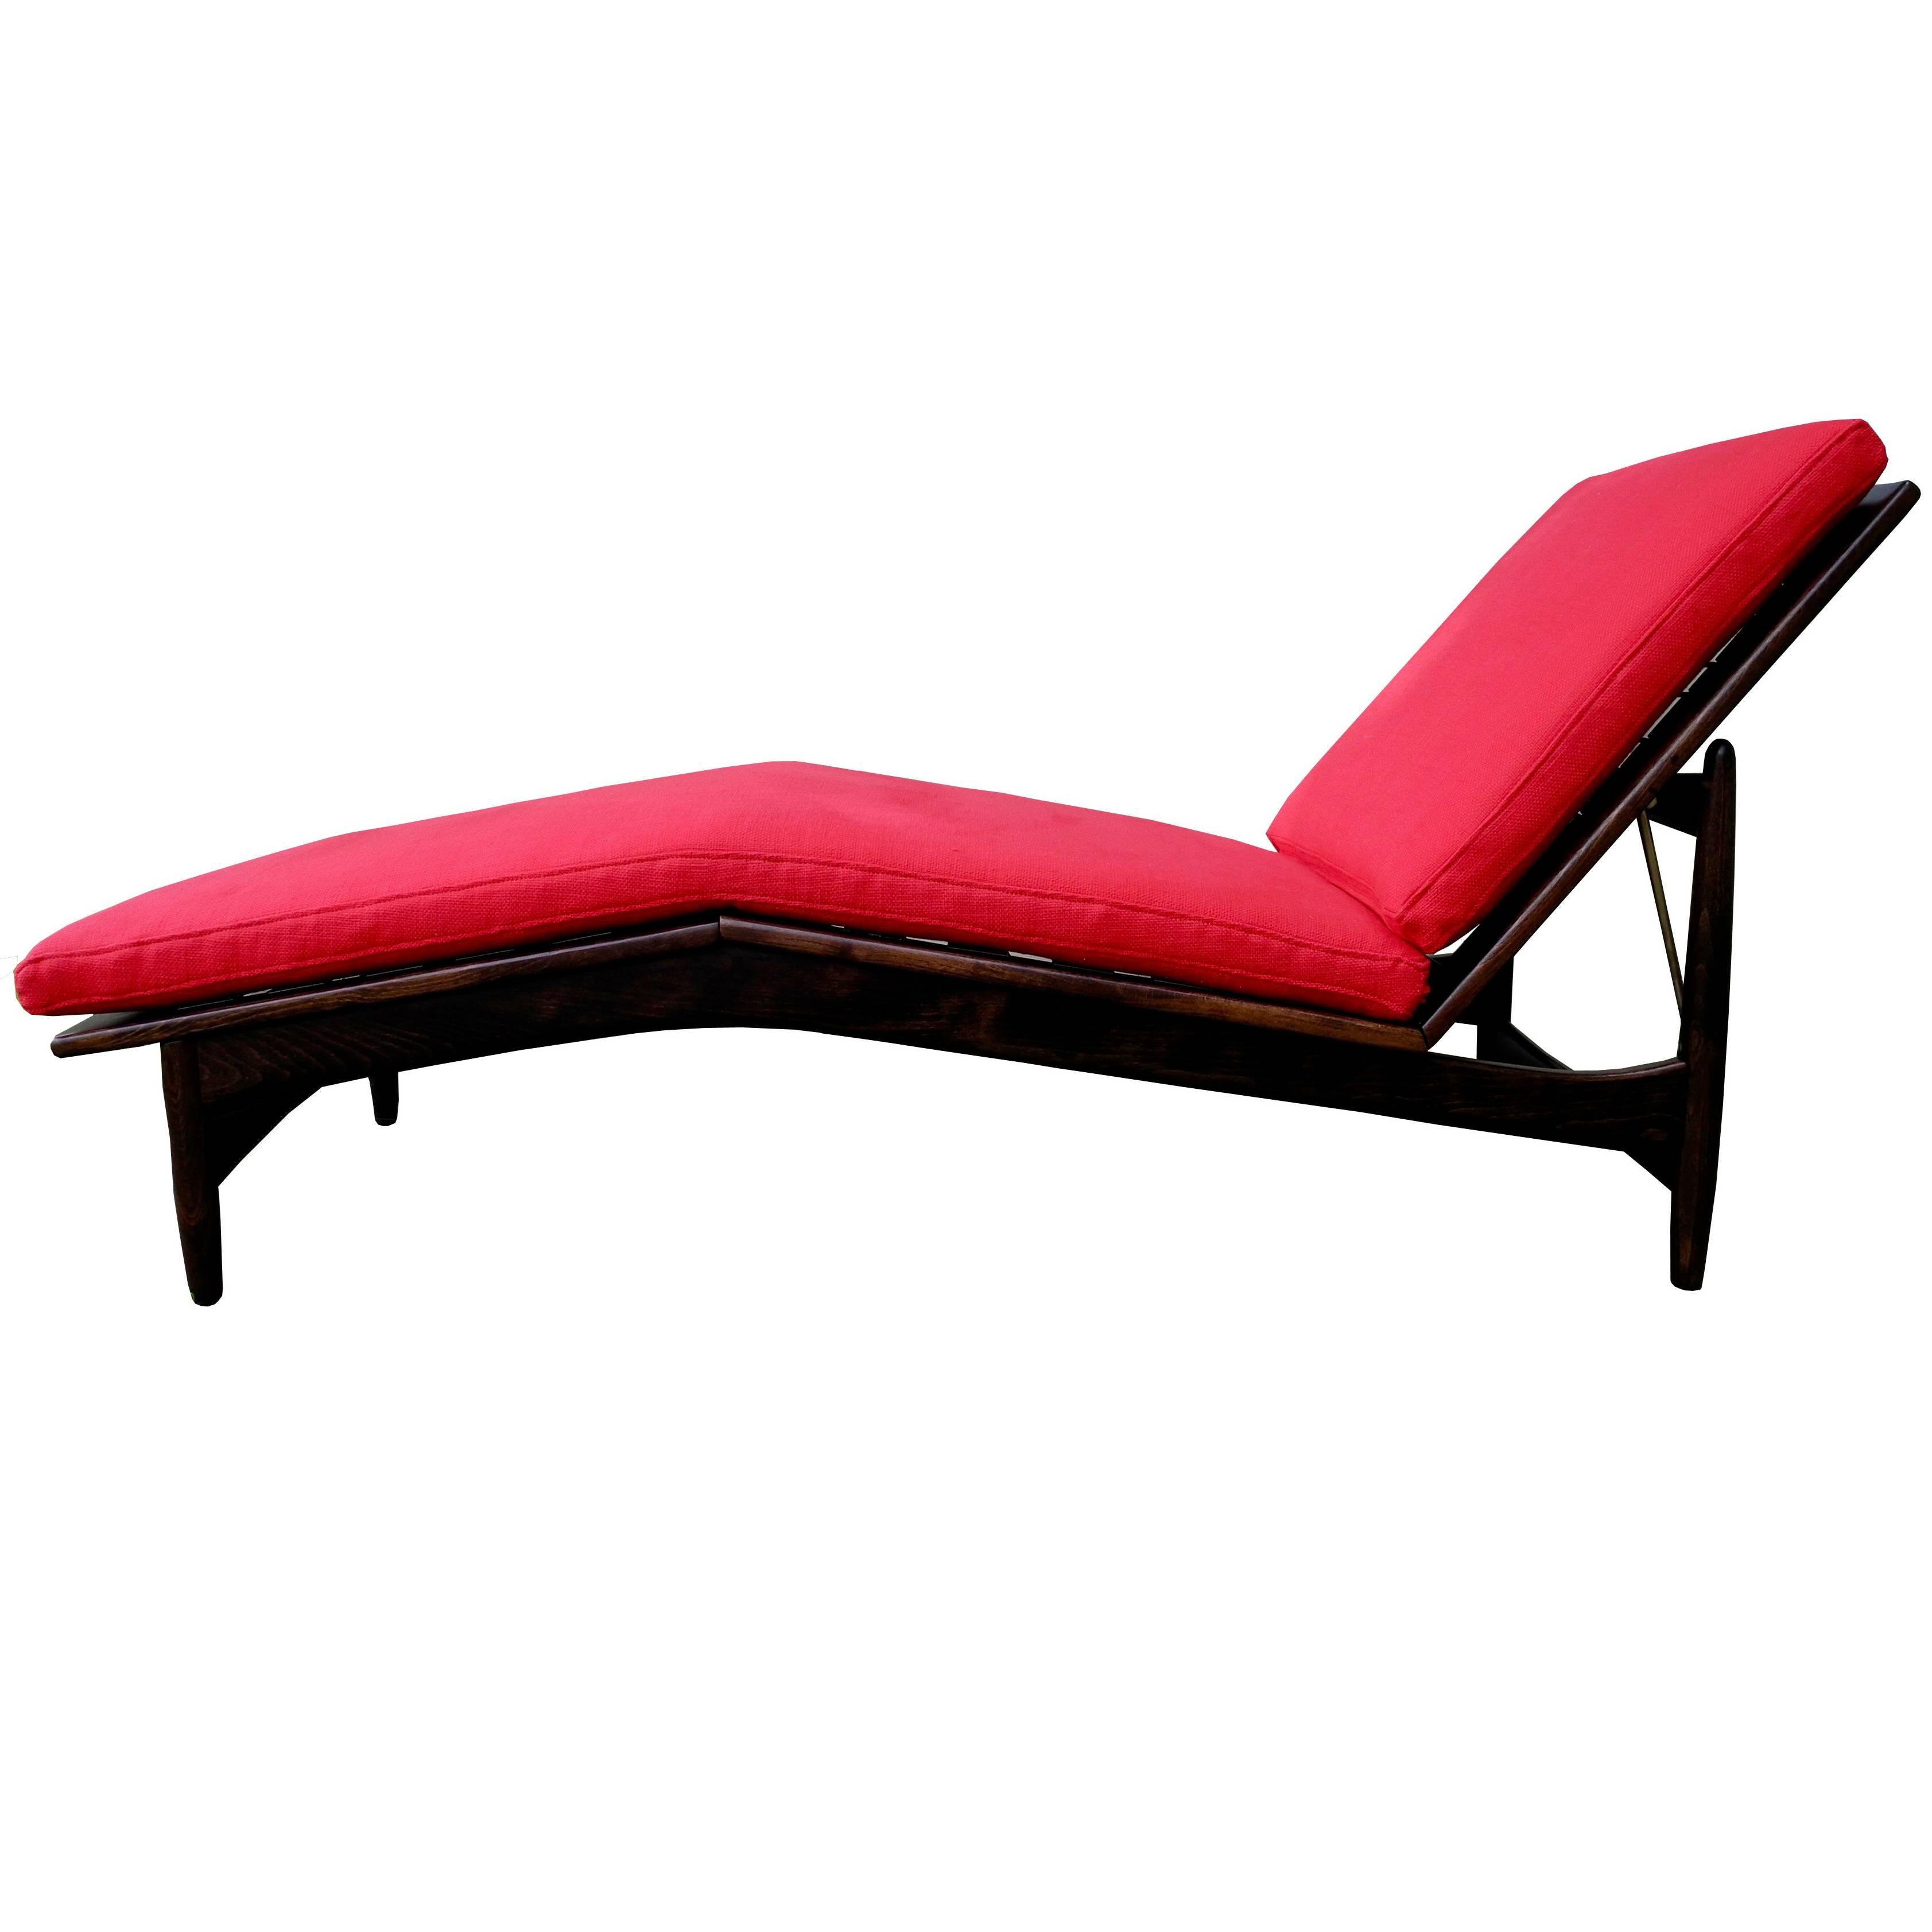 Danish Modern Beech and Upholstered Chaise Longue by Ib Kofod-Larsen for Selig For Sale